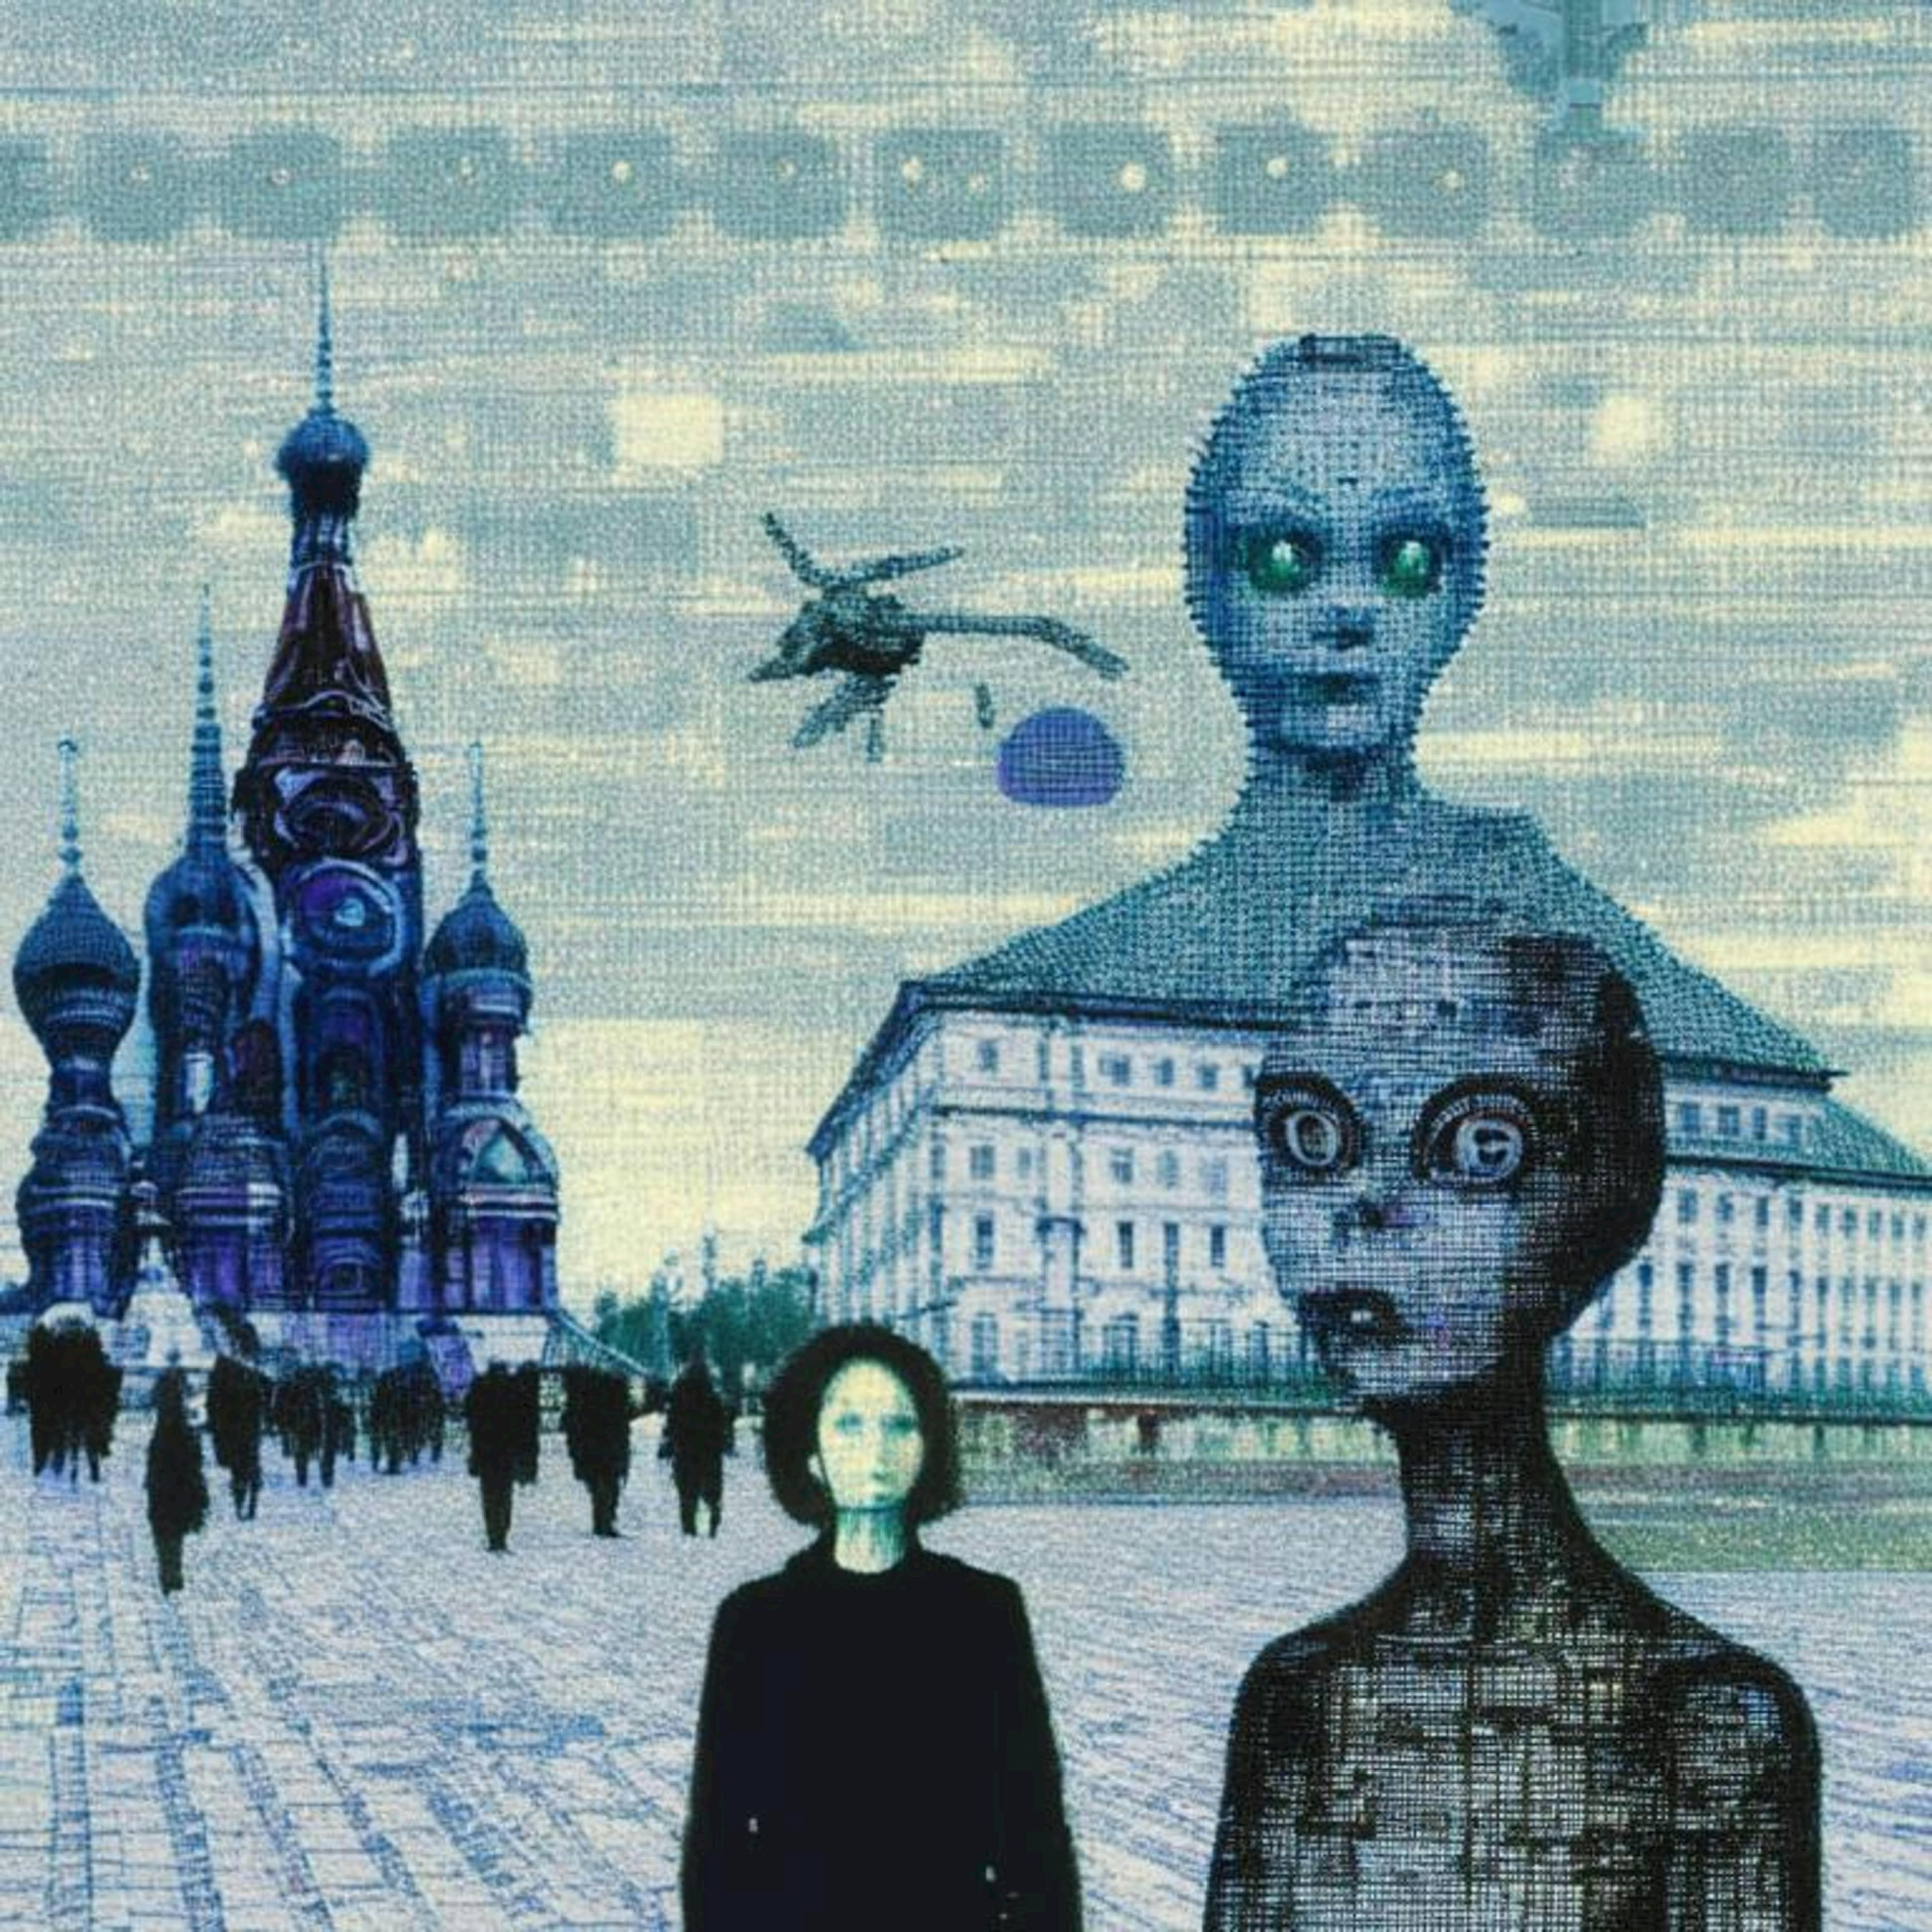 EXTRATERRESTRIAL GUESTS IN ST. PETERSBURG I